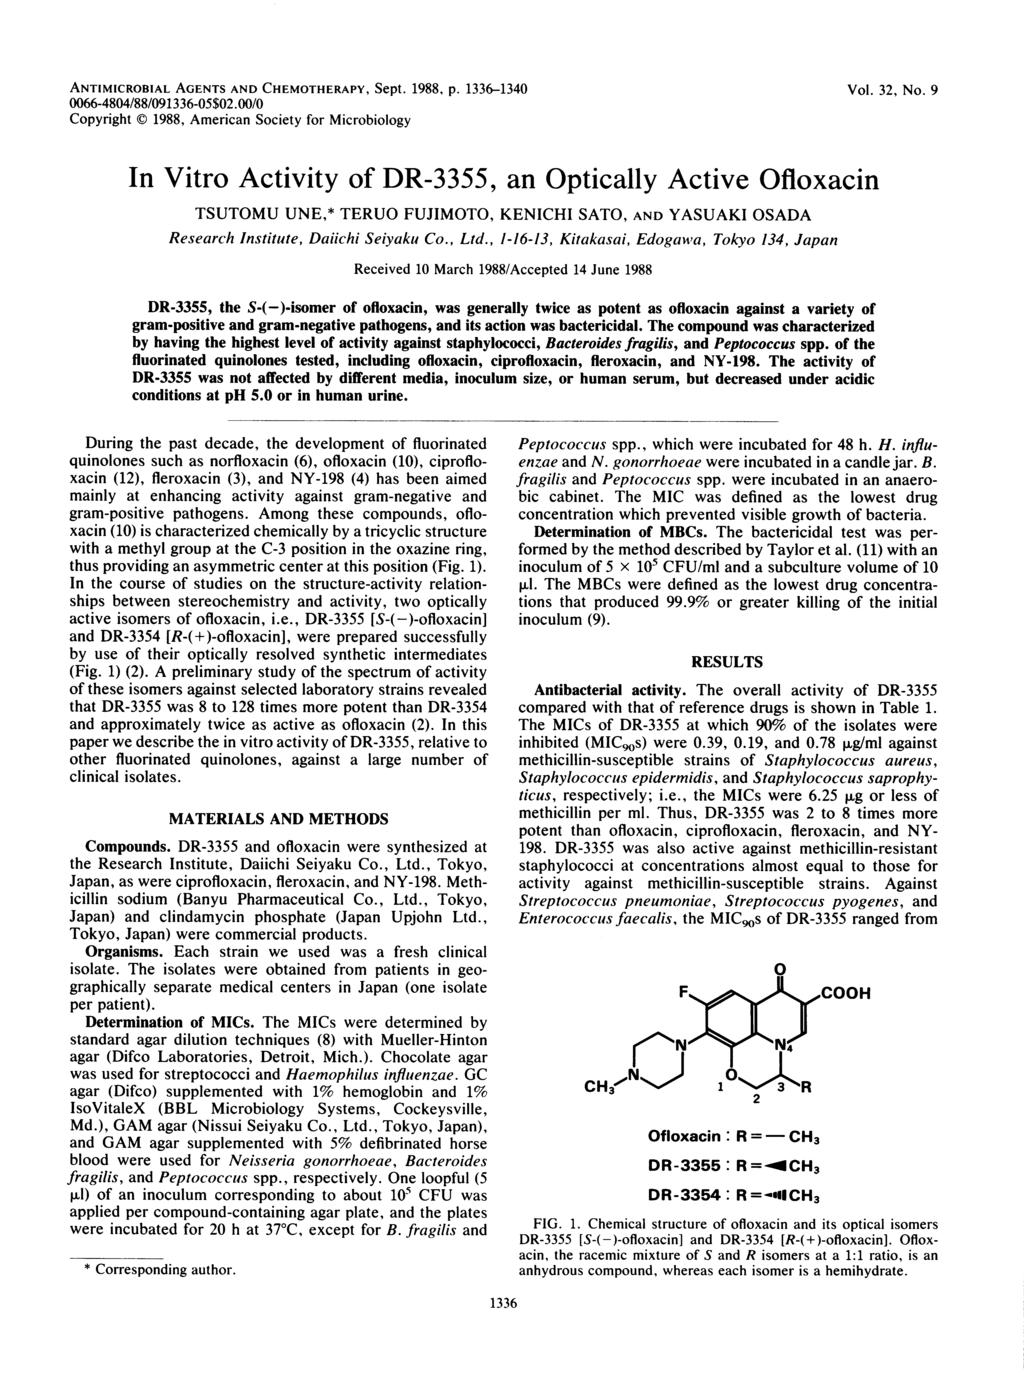 ANTIMICROBIAL AGENTS AND CHEMOTHERAPY, Sept. 1988, p. 1336-1340 0066-4804/88/091336-05$02.00/0 Copyright C 1988, American Society for Microbiology Vol. 32, No.